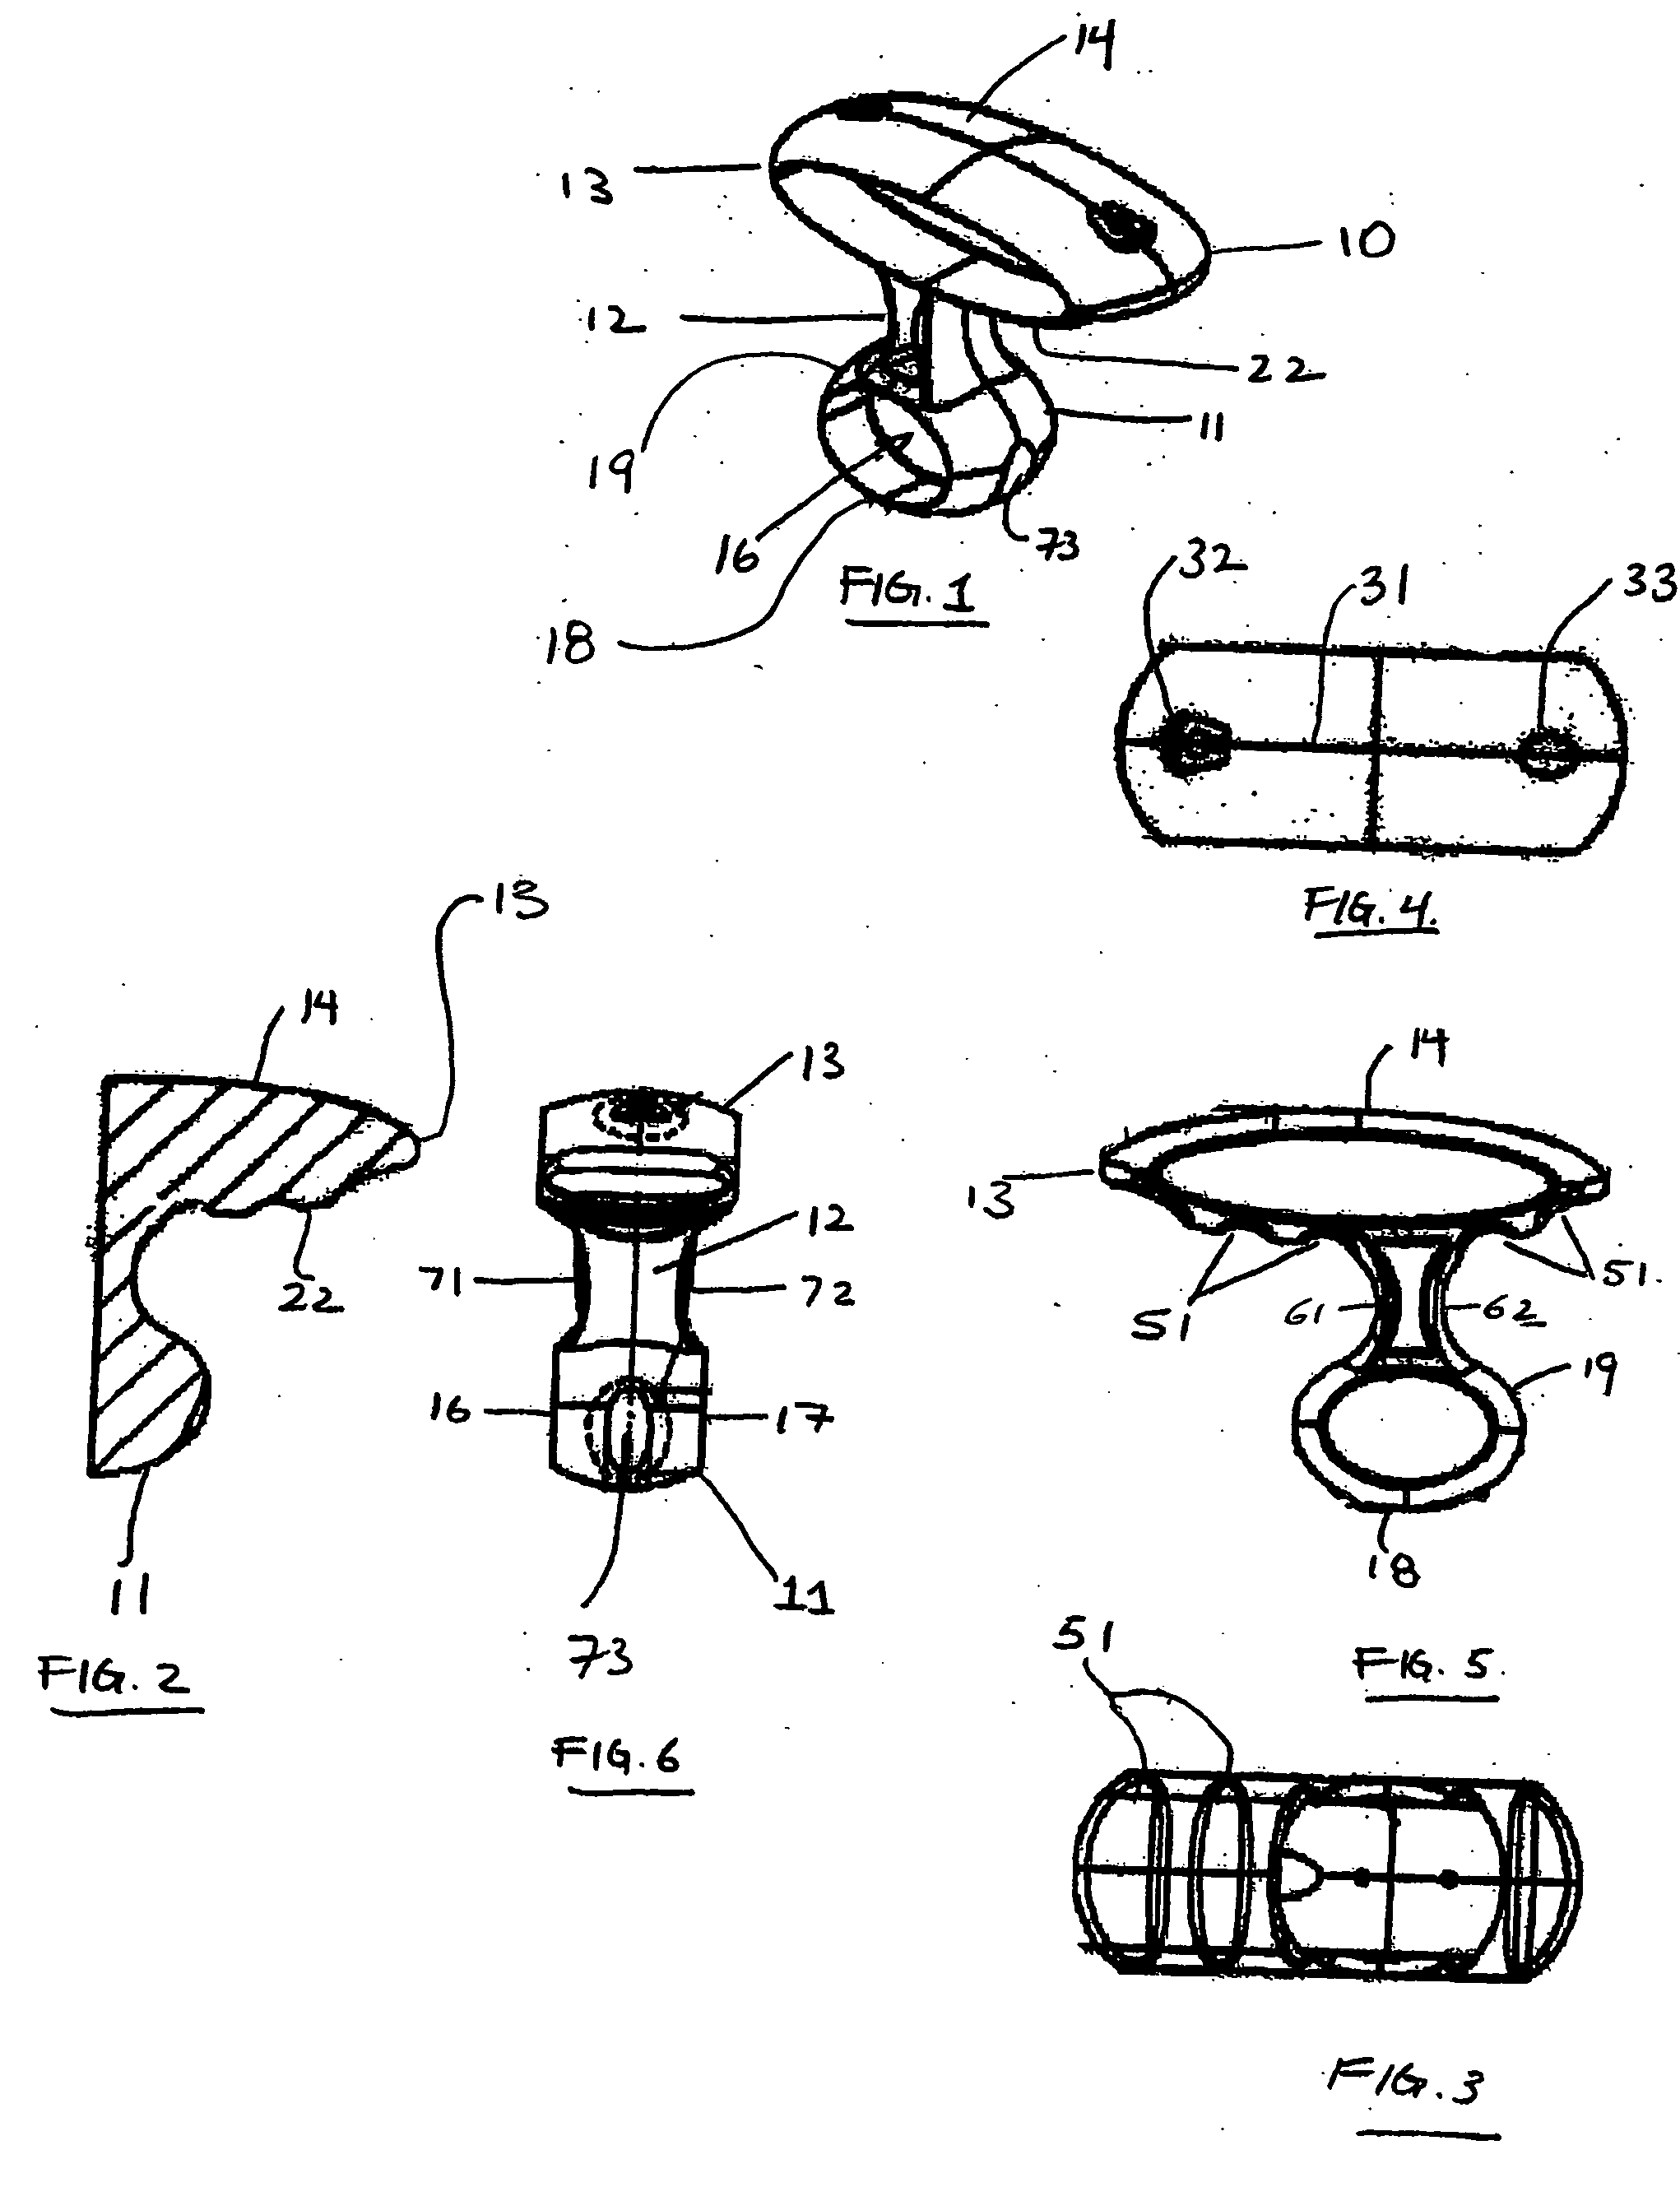 Methods and apparatus for a manual vascular compression device